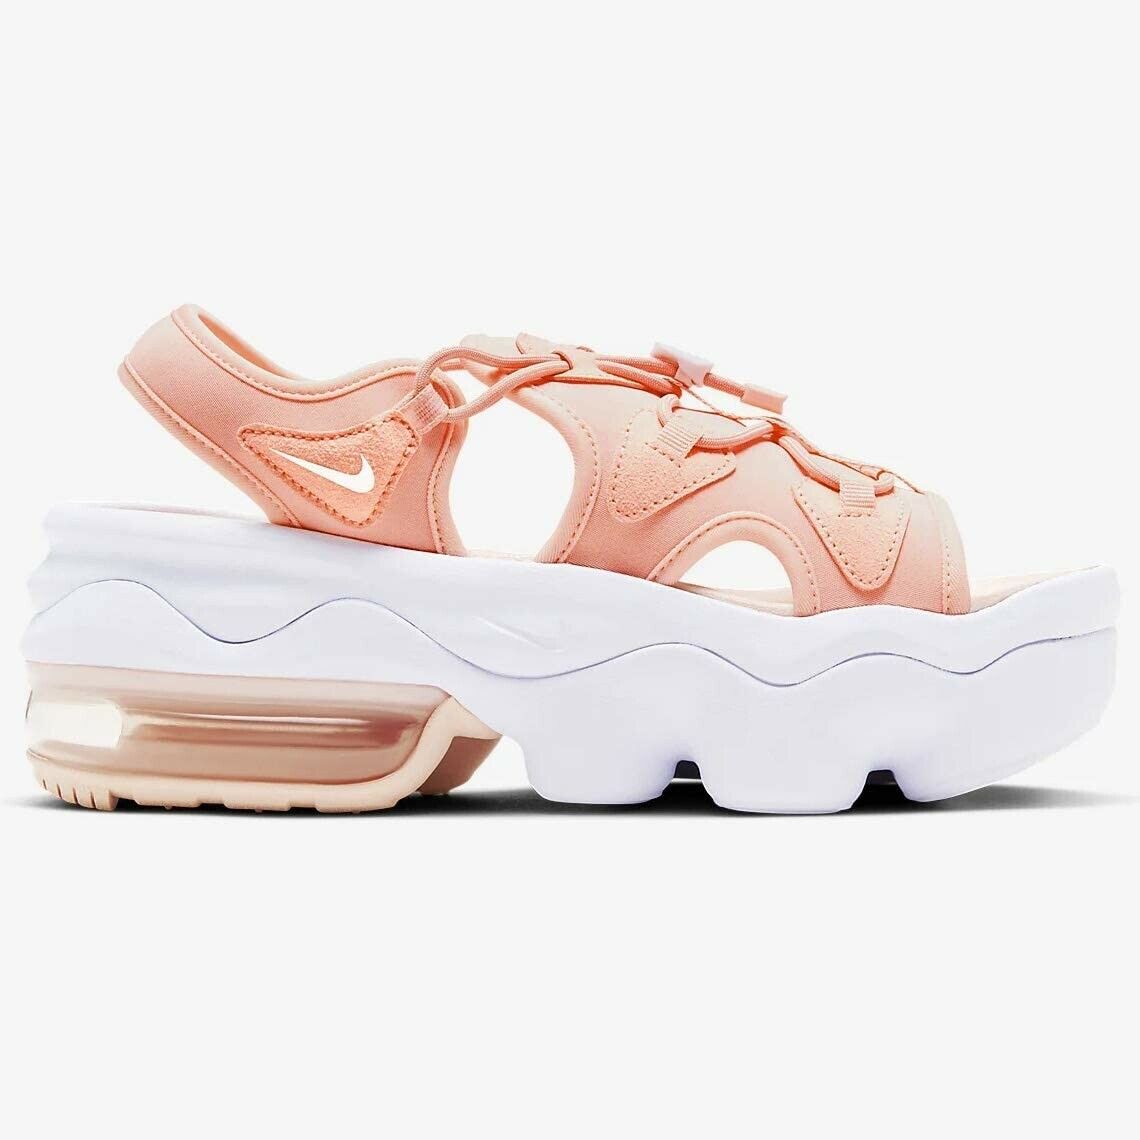 Nike Air Max Koko Sandal Washed Coral/White/Guava Ice Women's CW9705-600